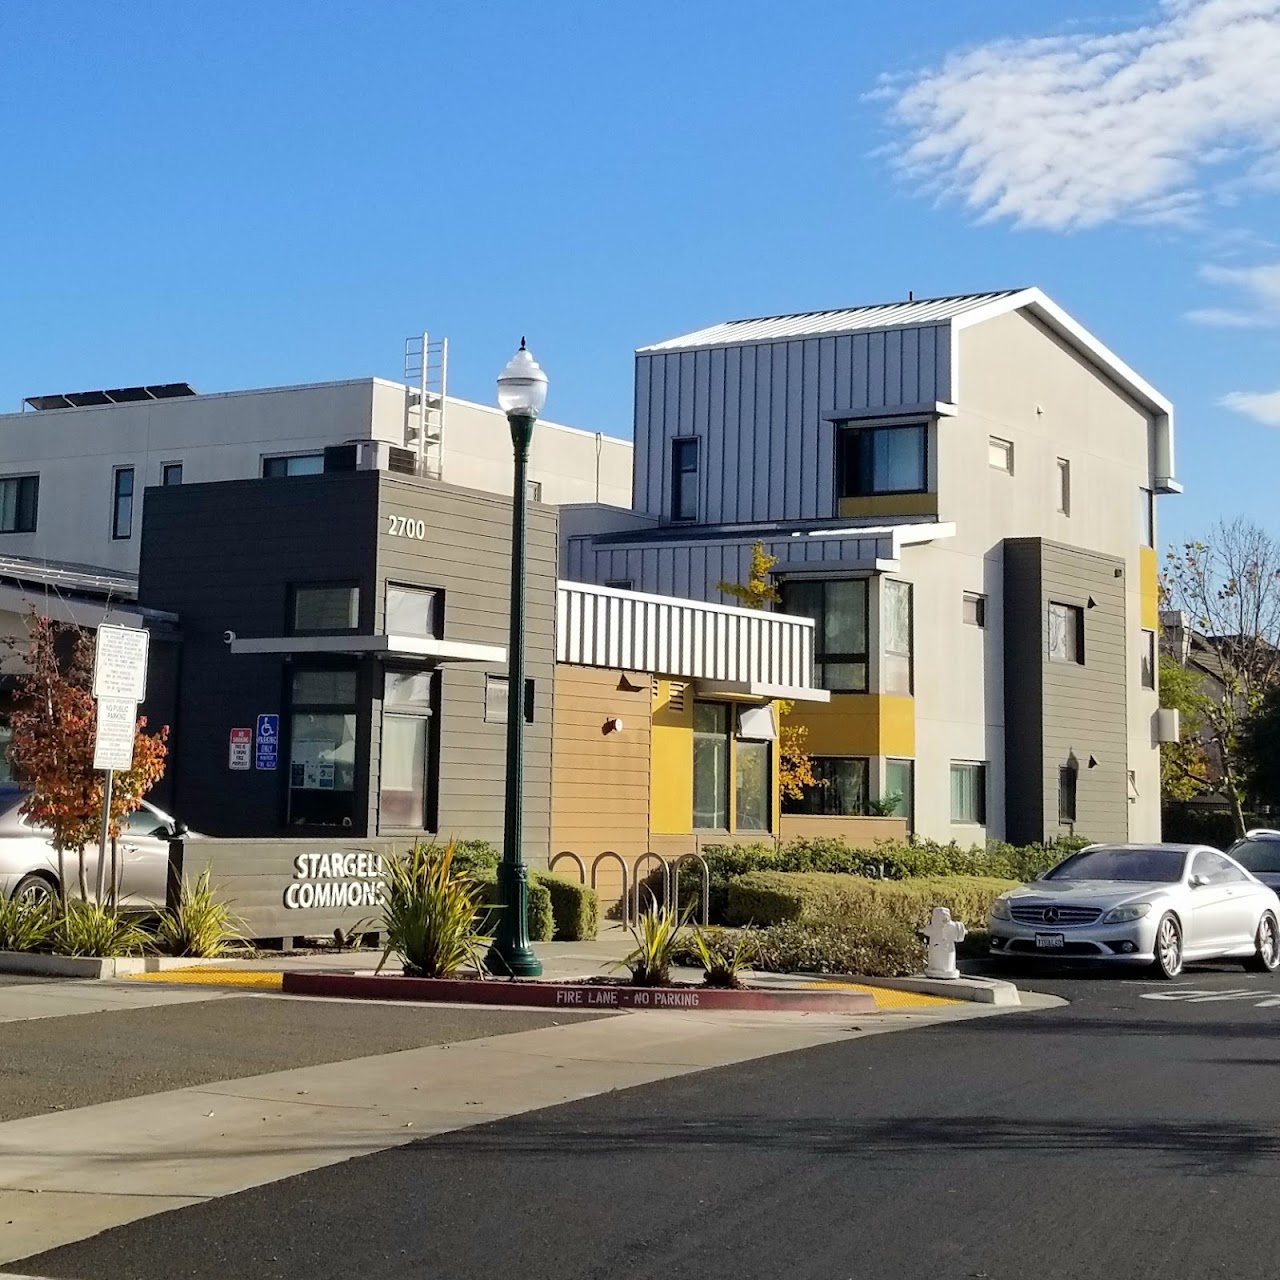 Photo of STARGELL COMMONS at 2700 BETTE STREET ALAMEDA, CA 94501